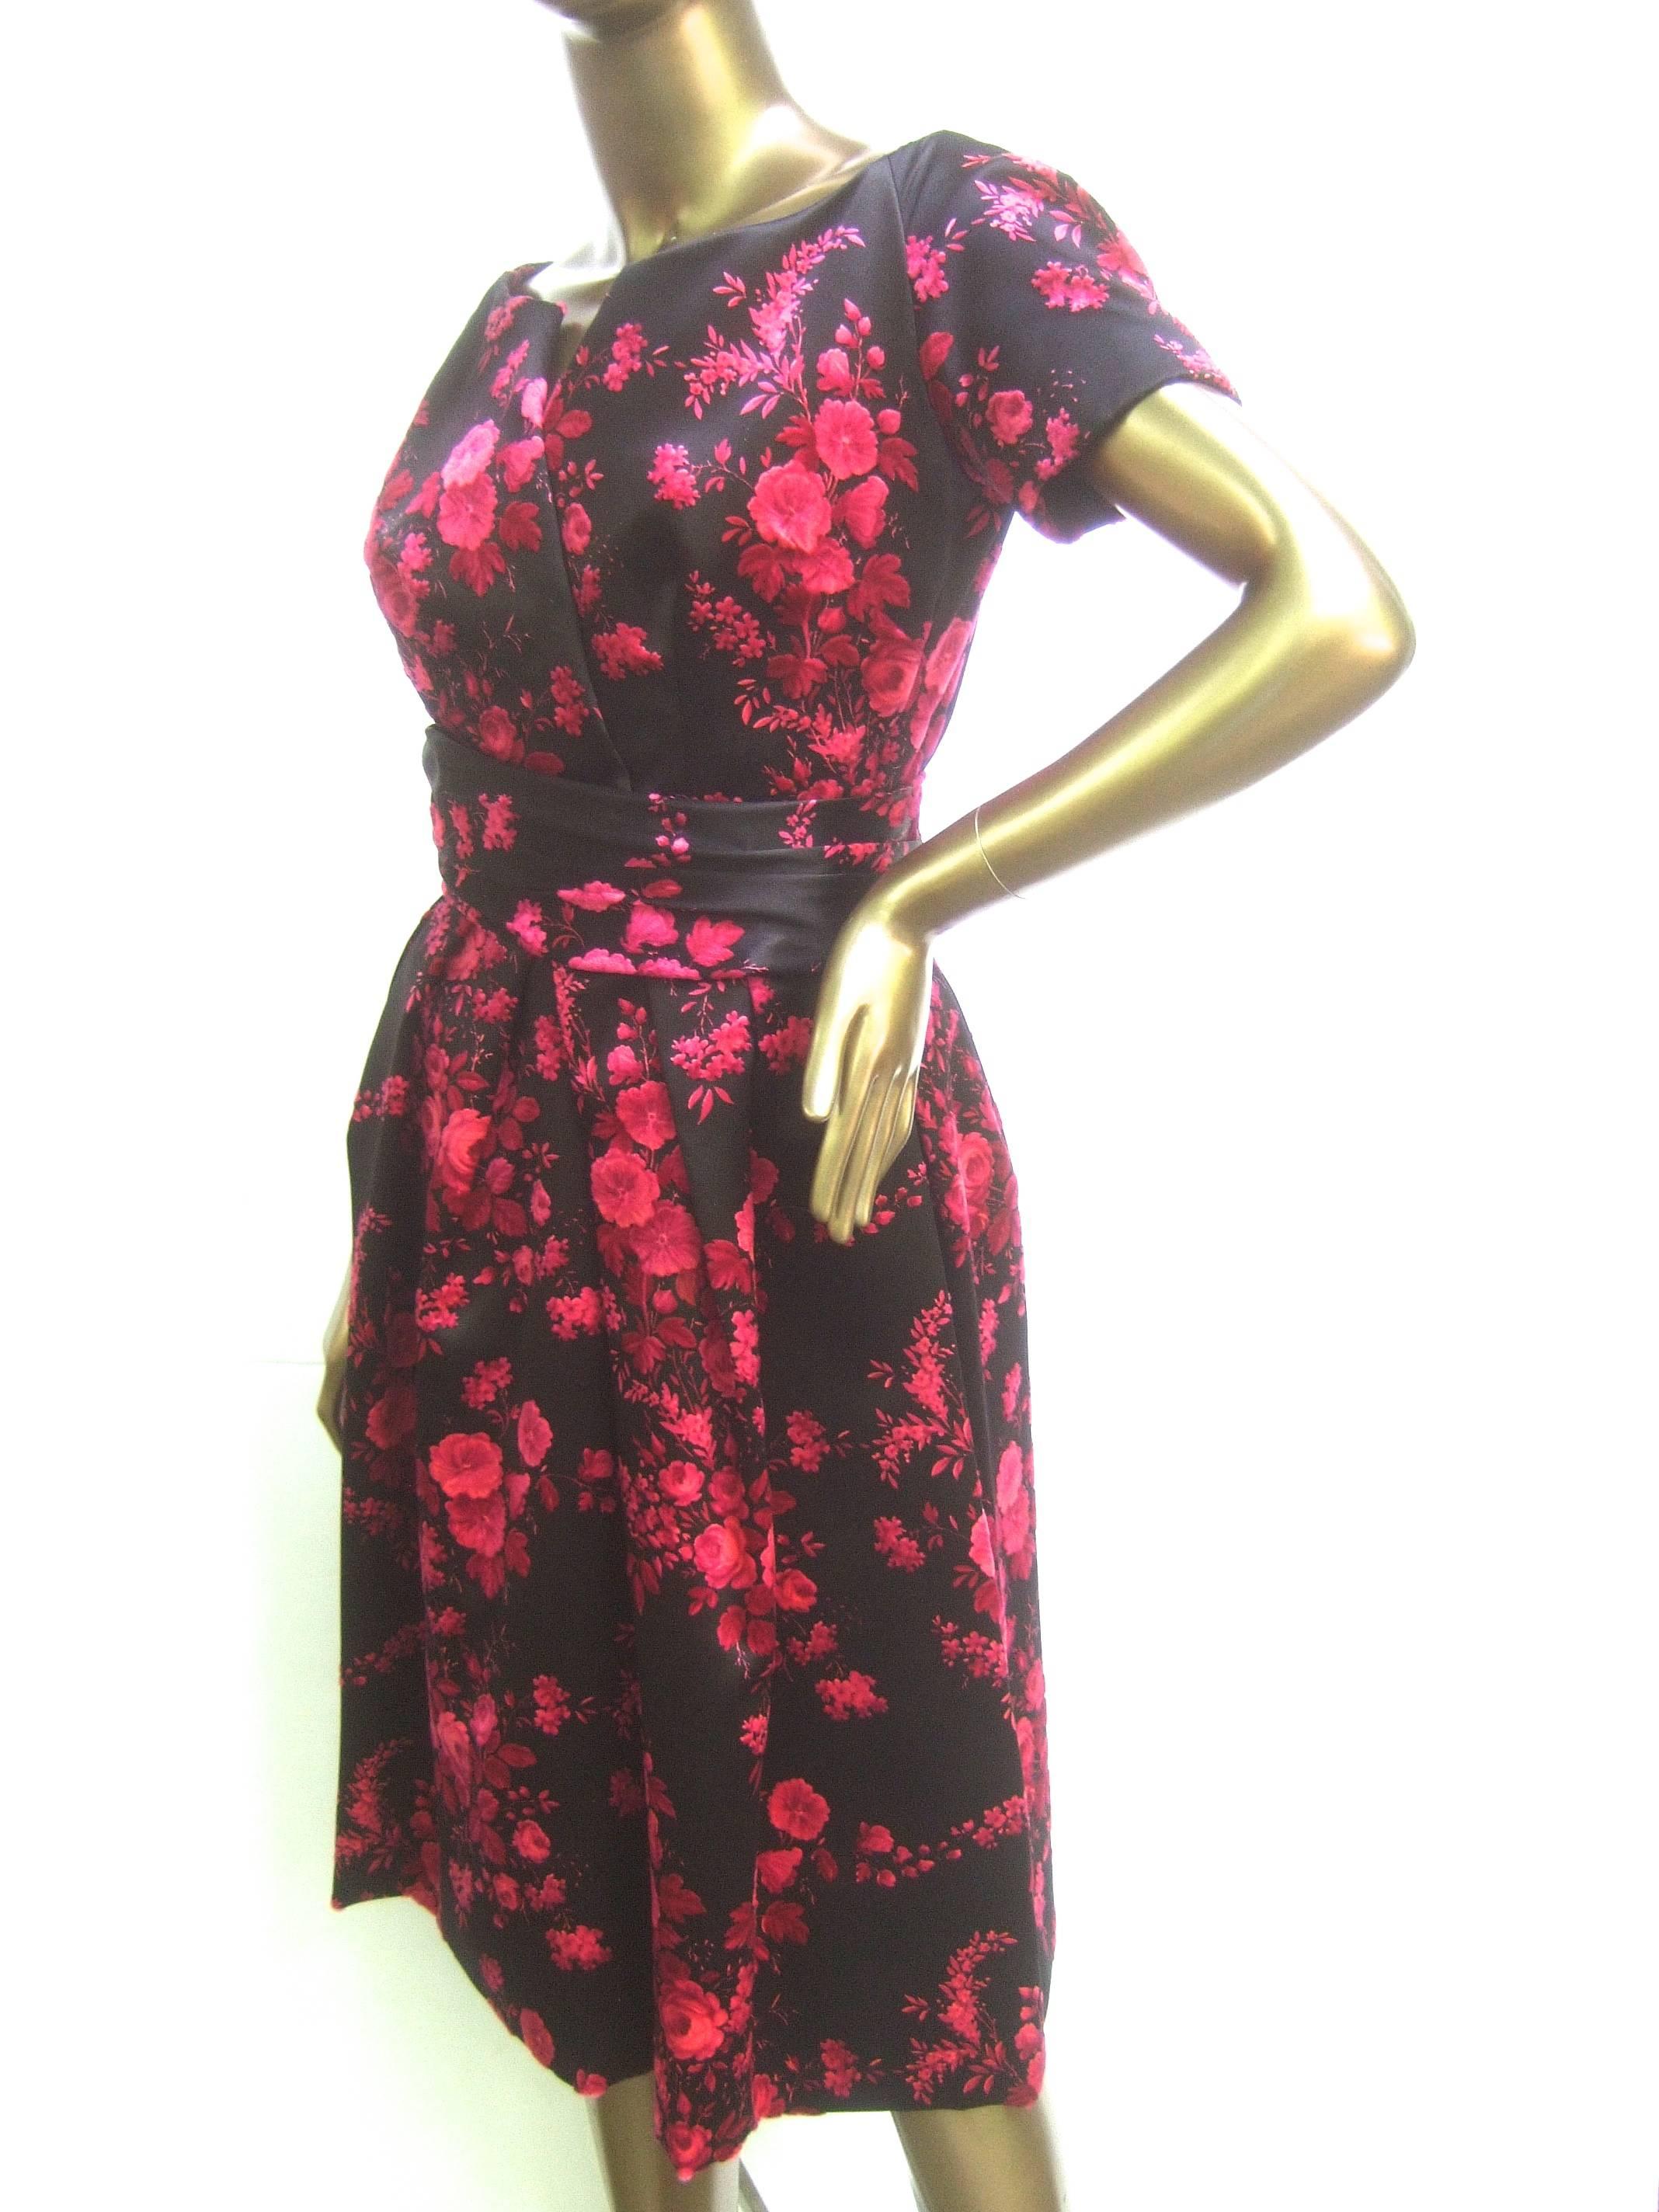 Christian Dior Couture satin floral print cocktail dress c 1960
The elegant couture dress is designed with black 
satin fabric infused with vibrant fuchsia flower blooms

Designed with a matching fabric belt that hooks 
The chic couture dress is